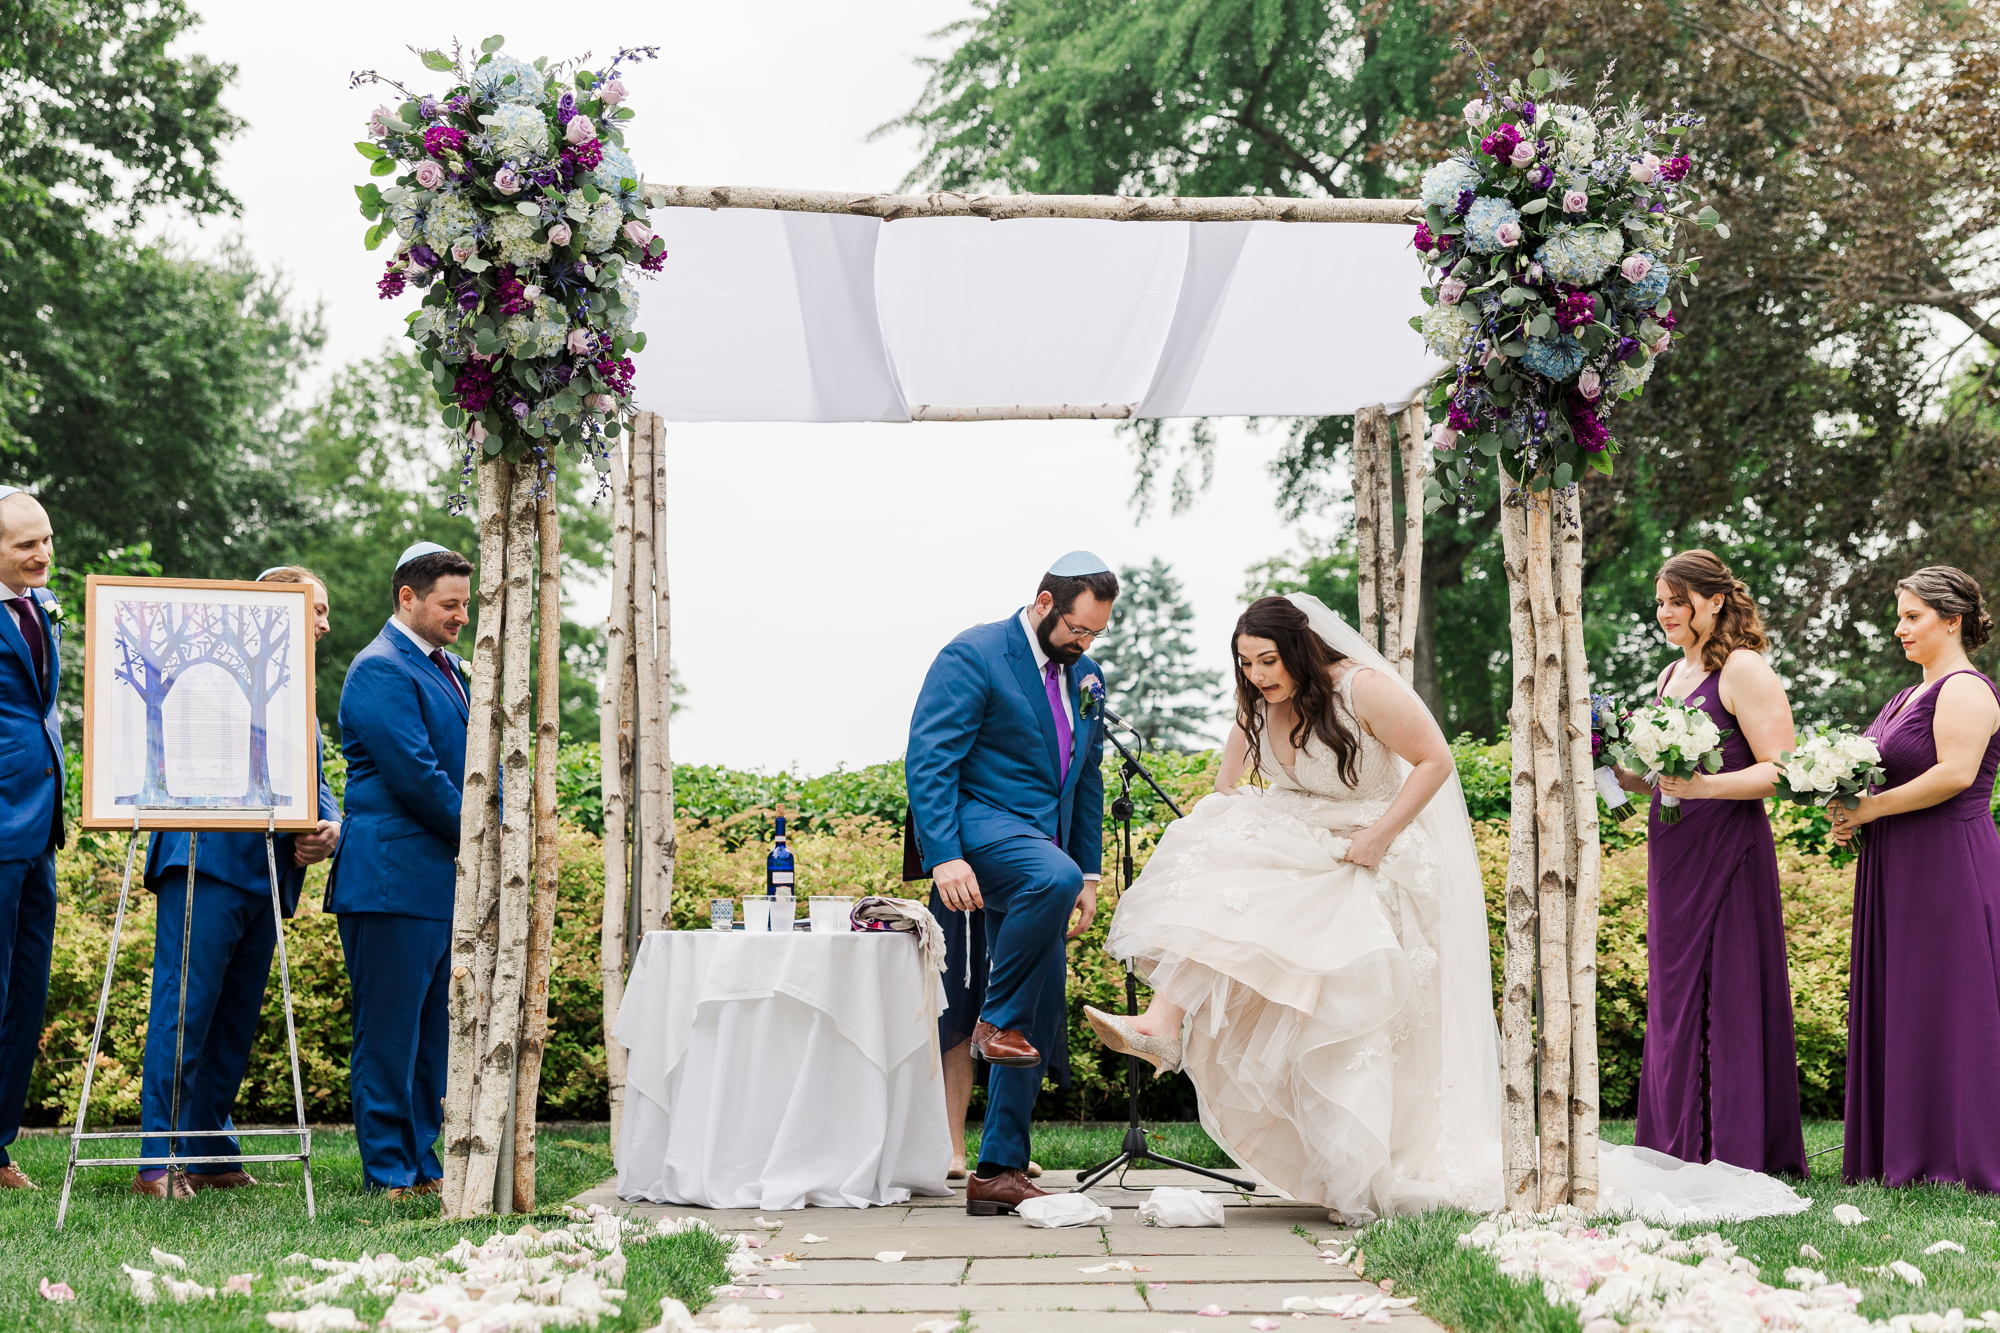 Radiant Wedding at the Briarcliff Manor